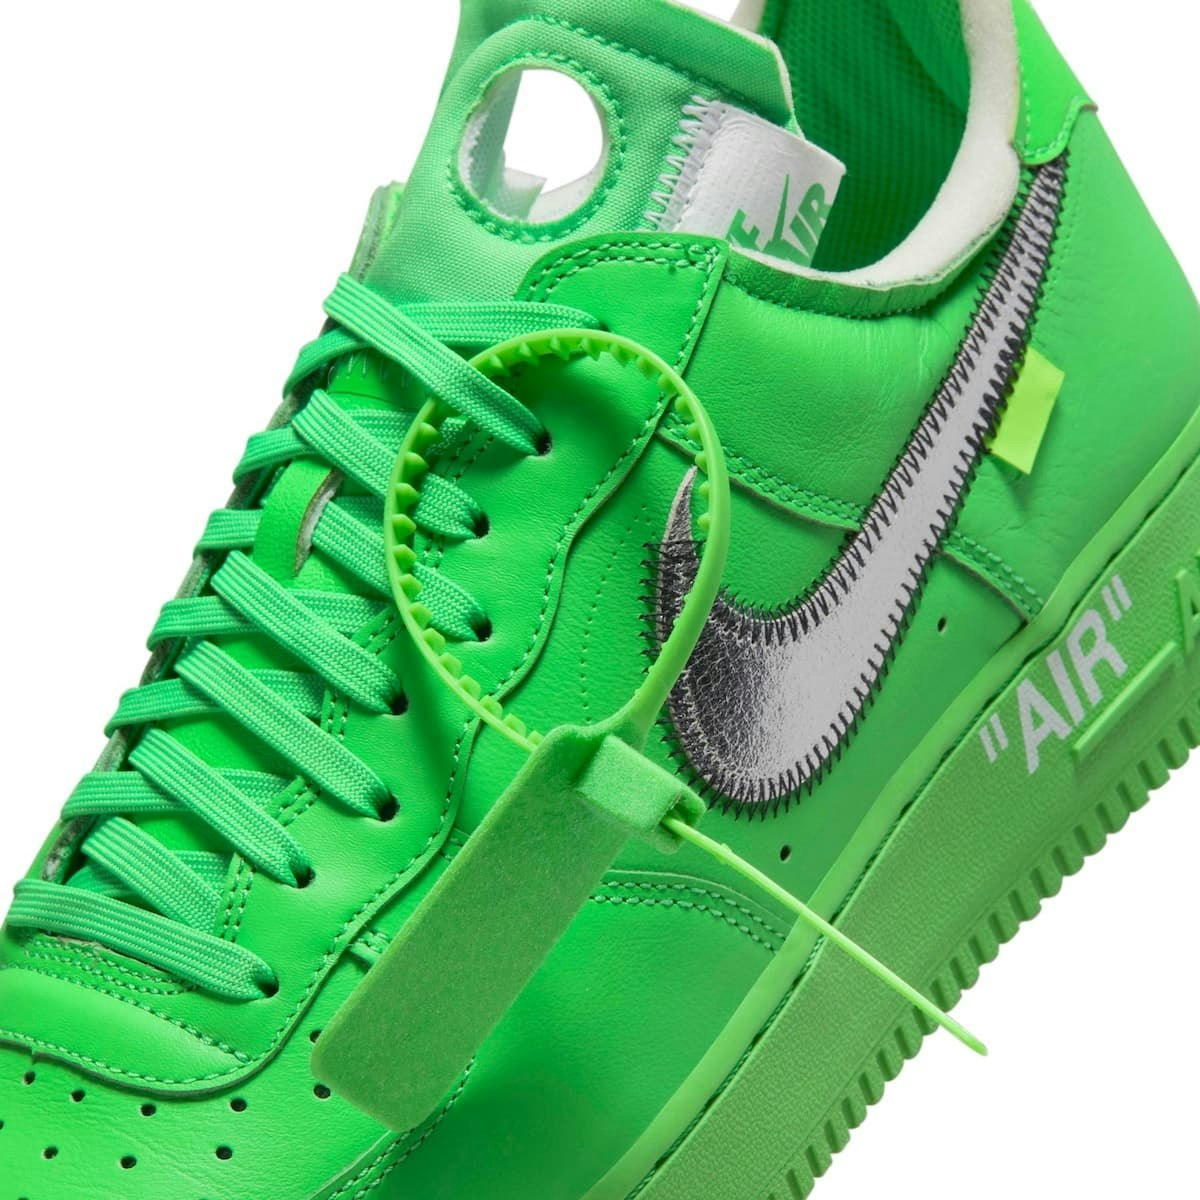 Off-White x Nike Air Force 1 Low "Green" 